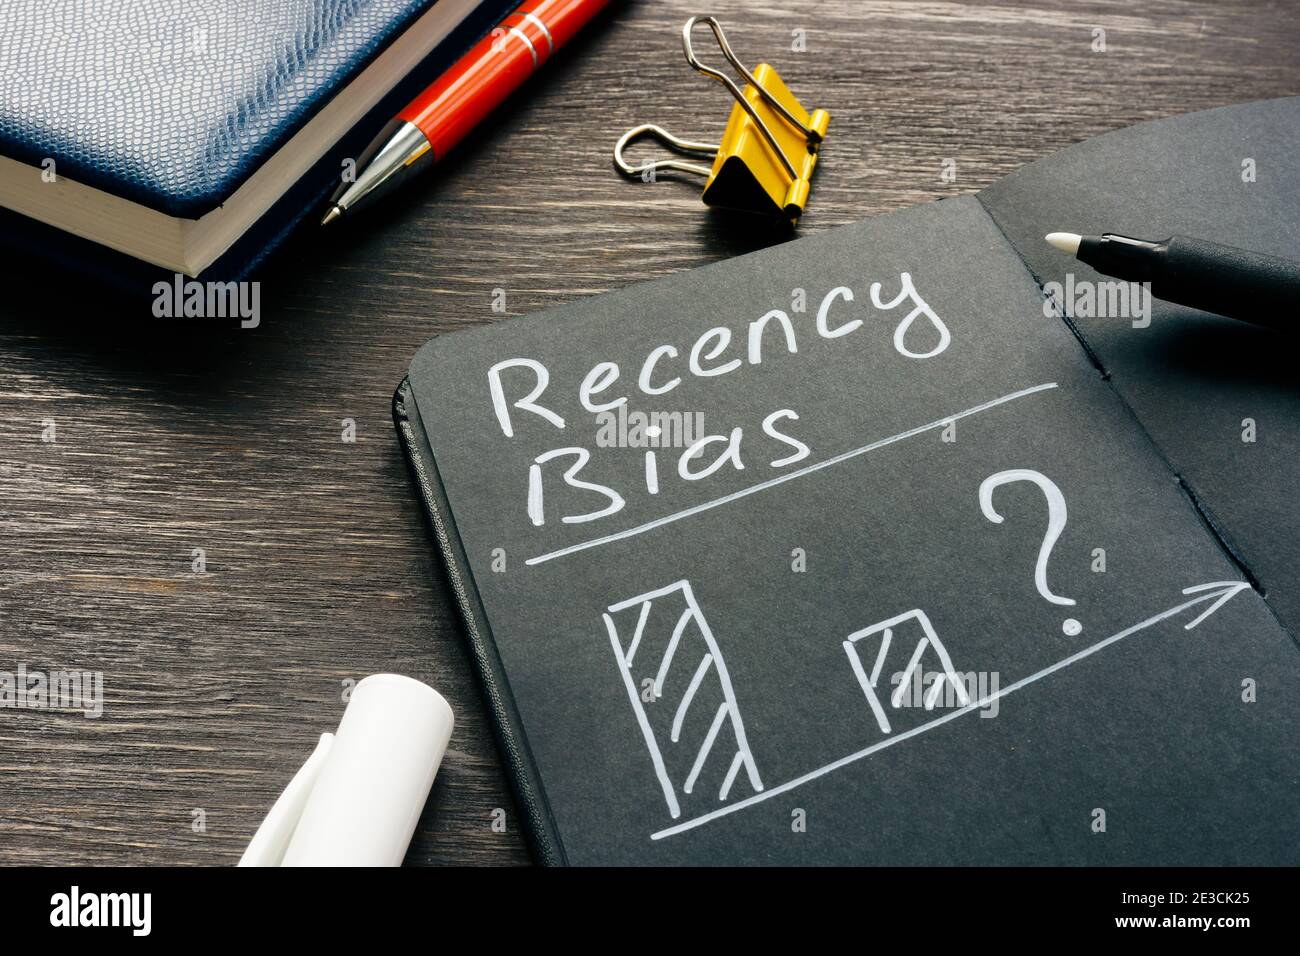 Recency bias and charts about prediction in the note. Stock Photo